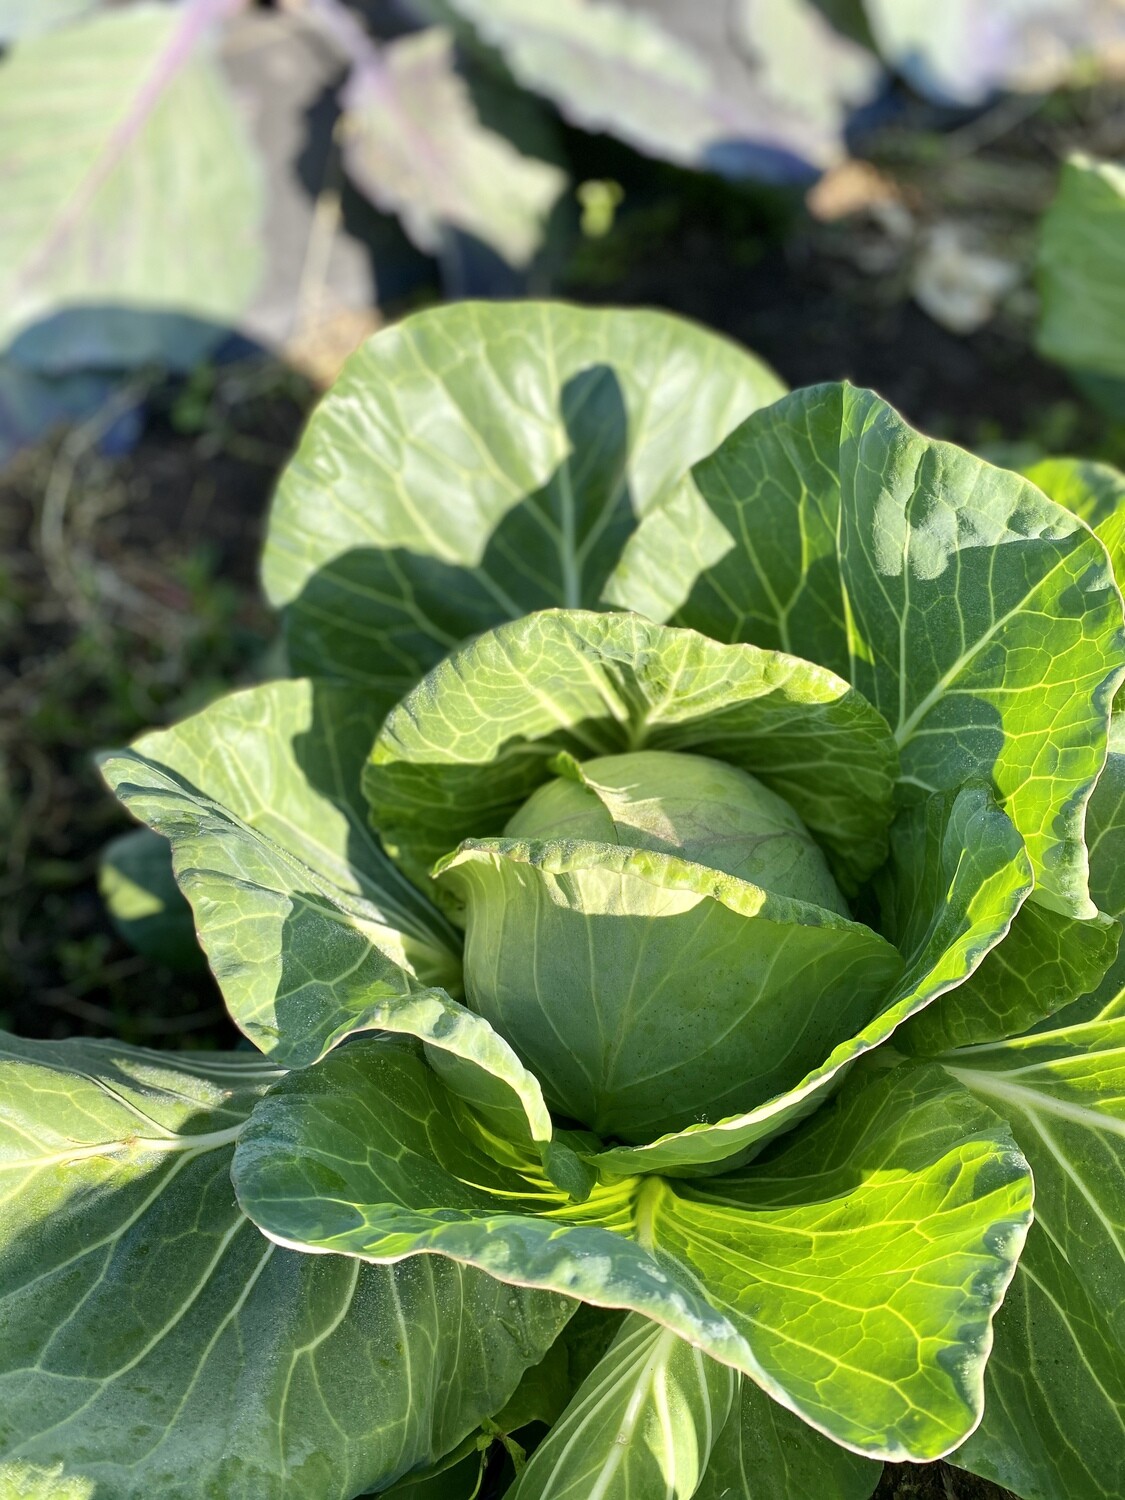 Green cabbage